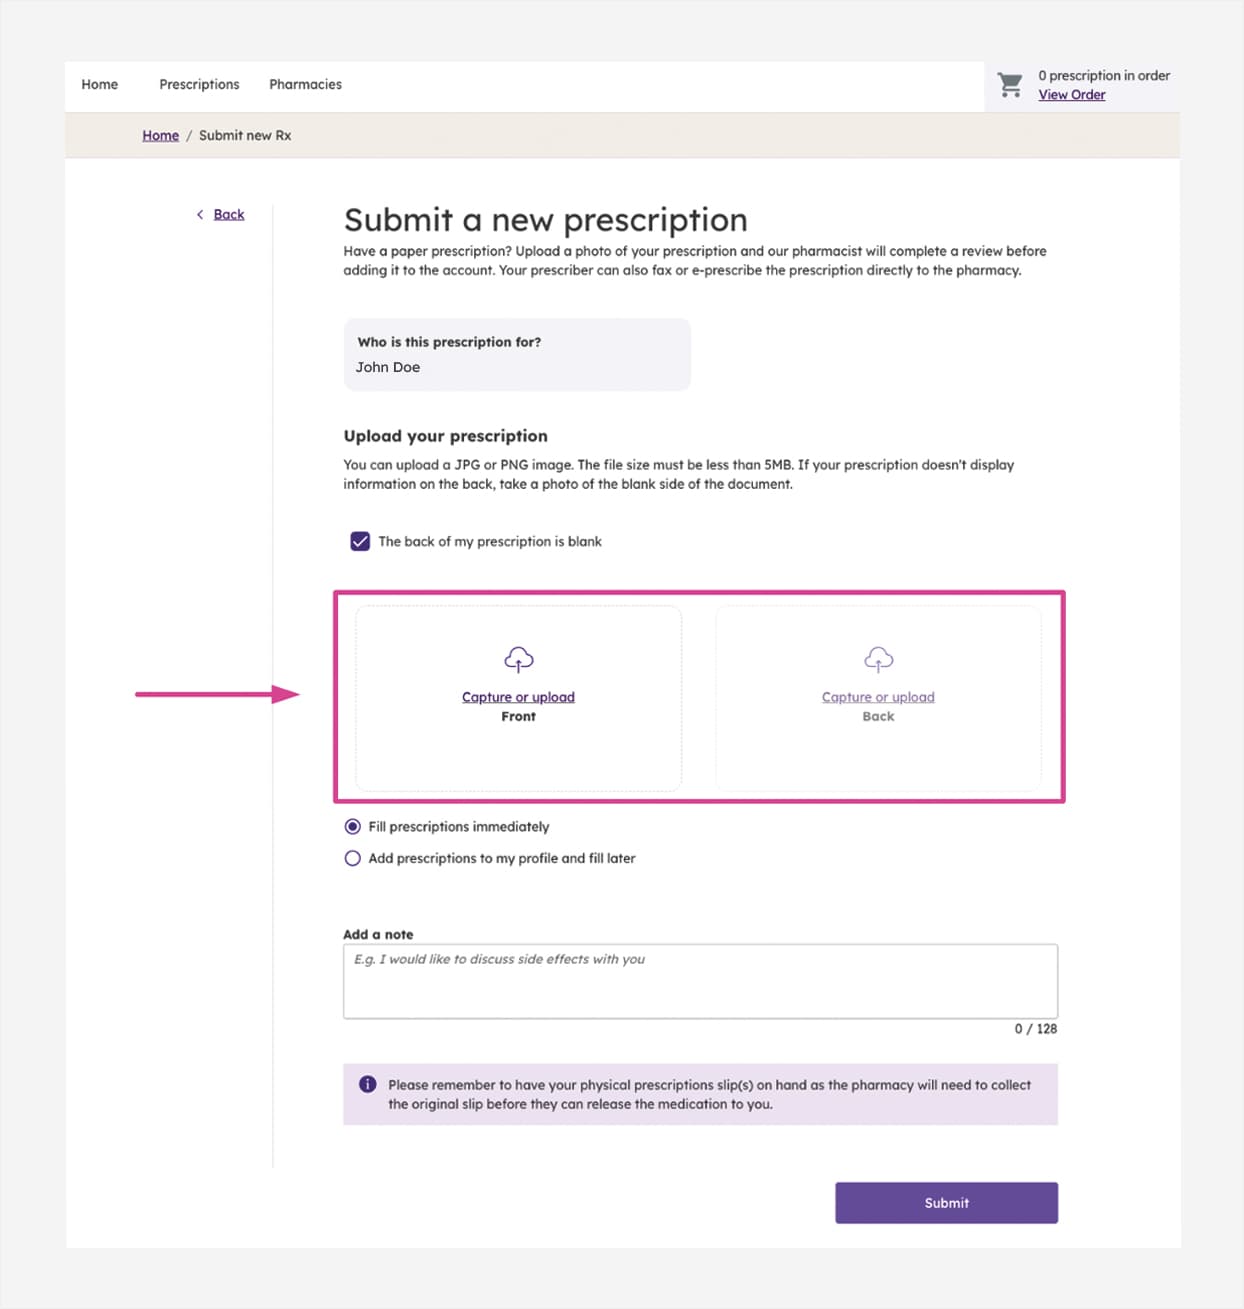 An image showing the process of upload and submit your prescription.